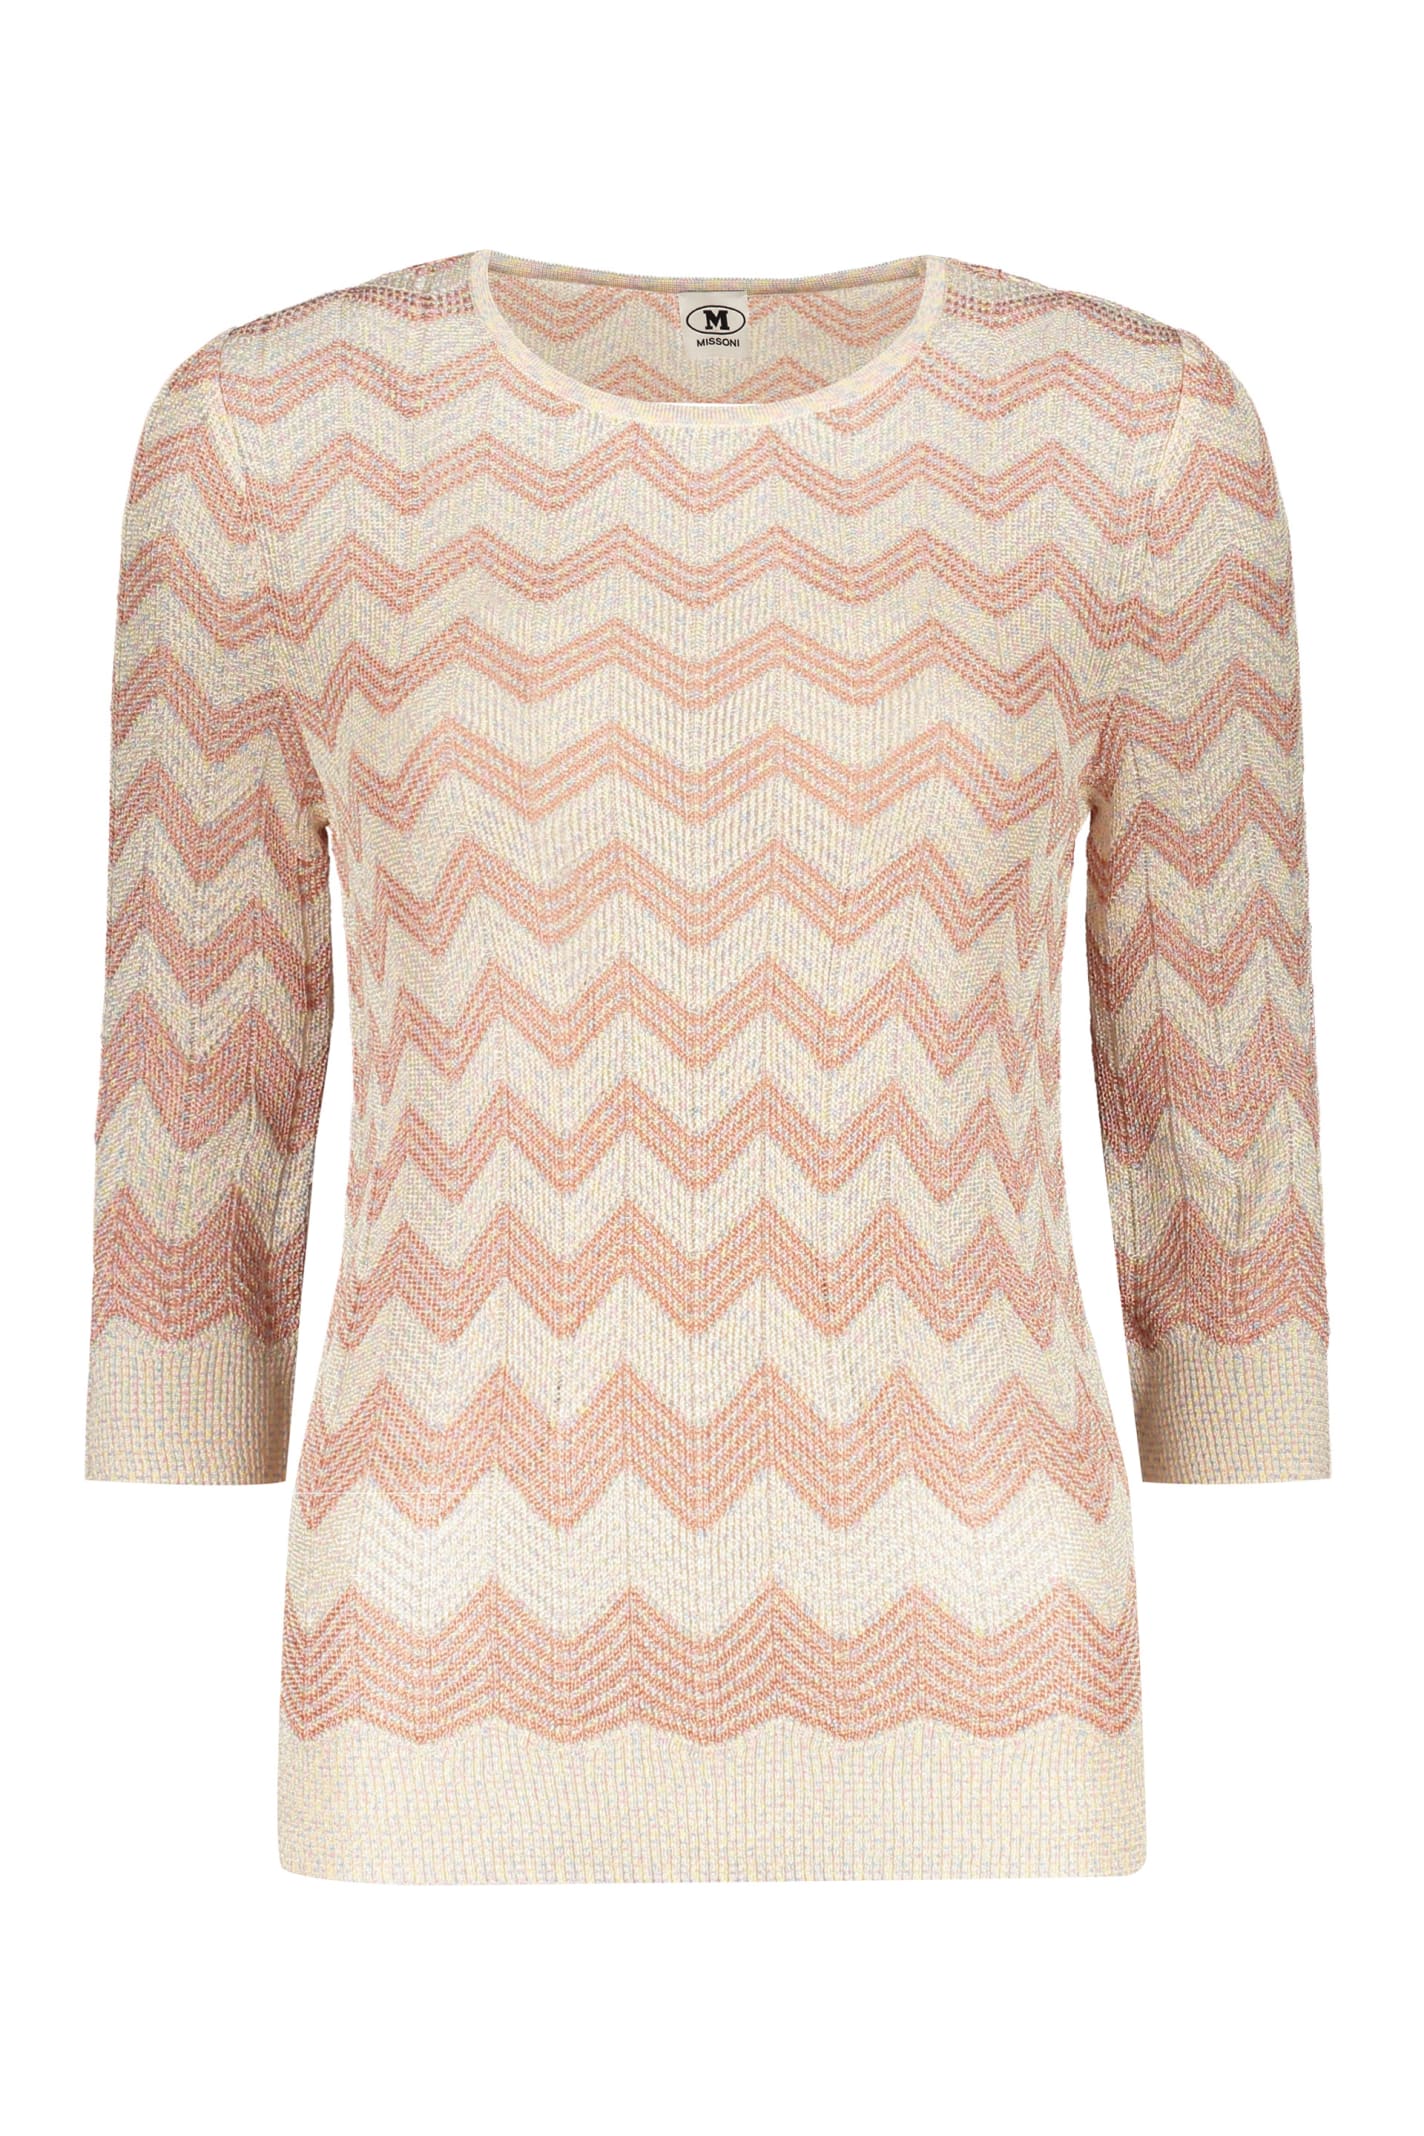 Missoni Knitted Top In Multicolor